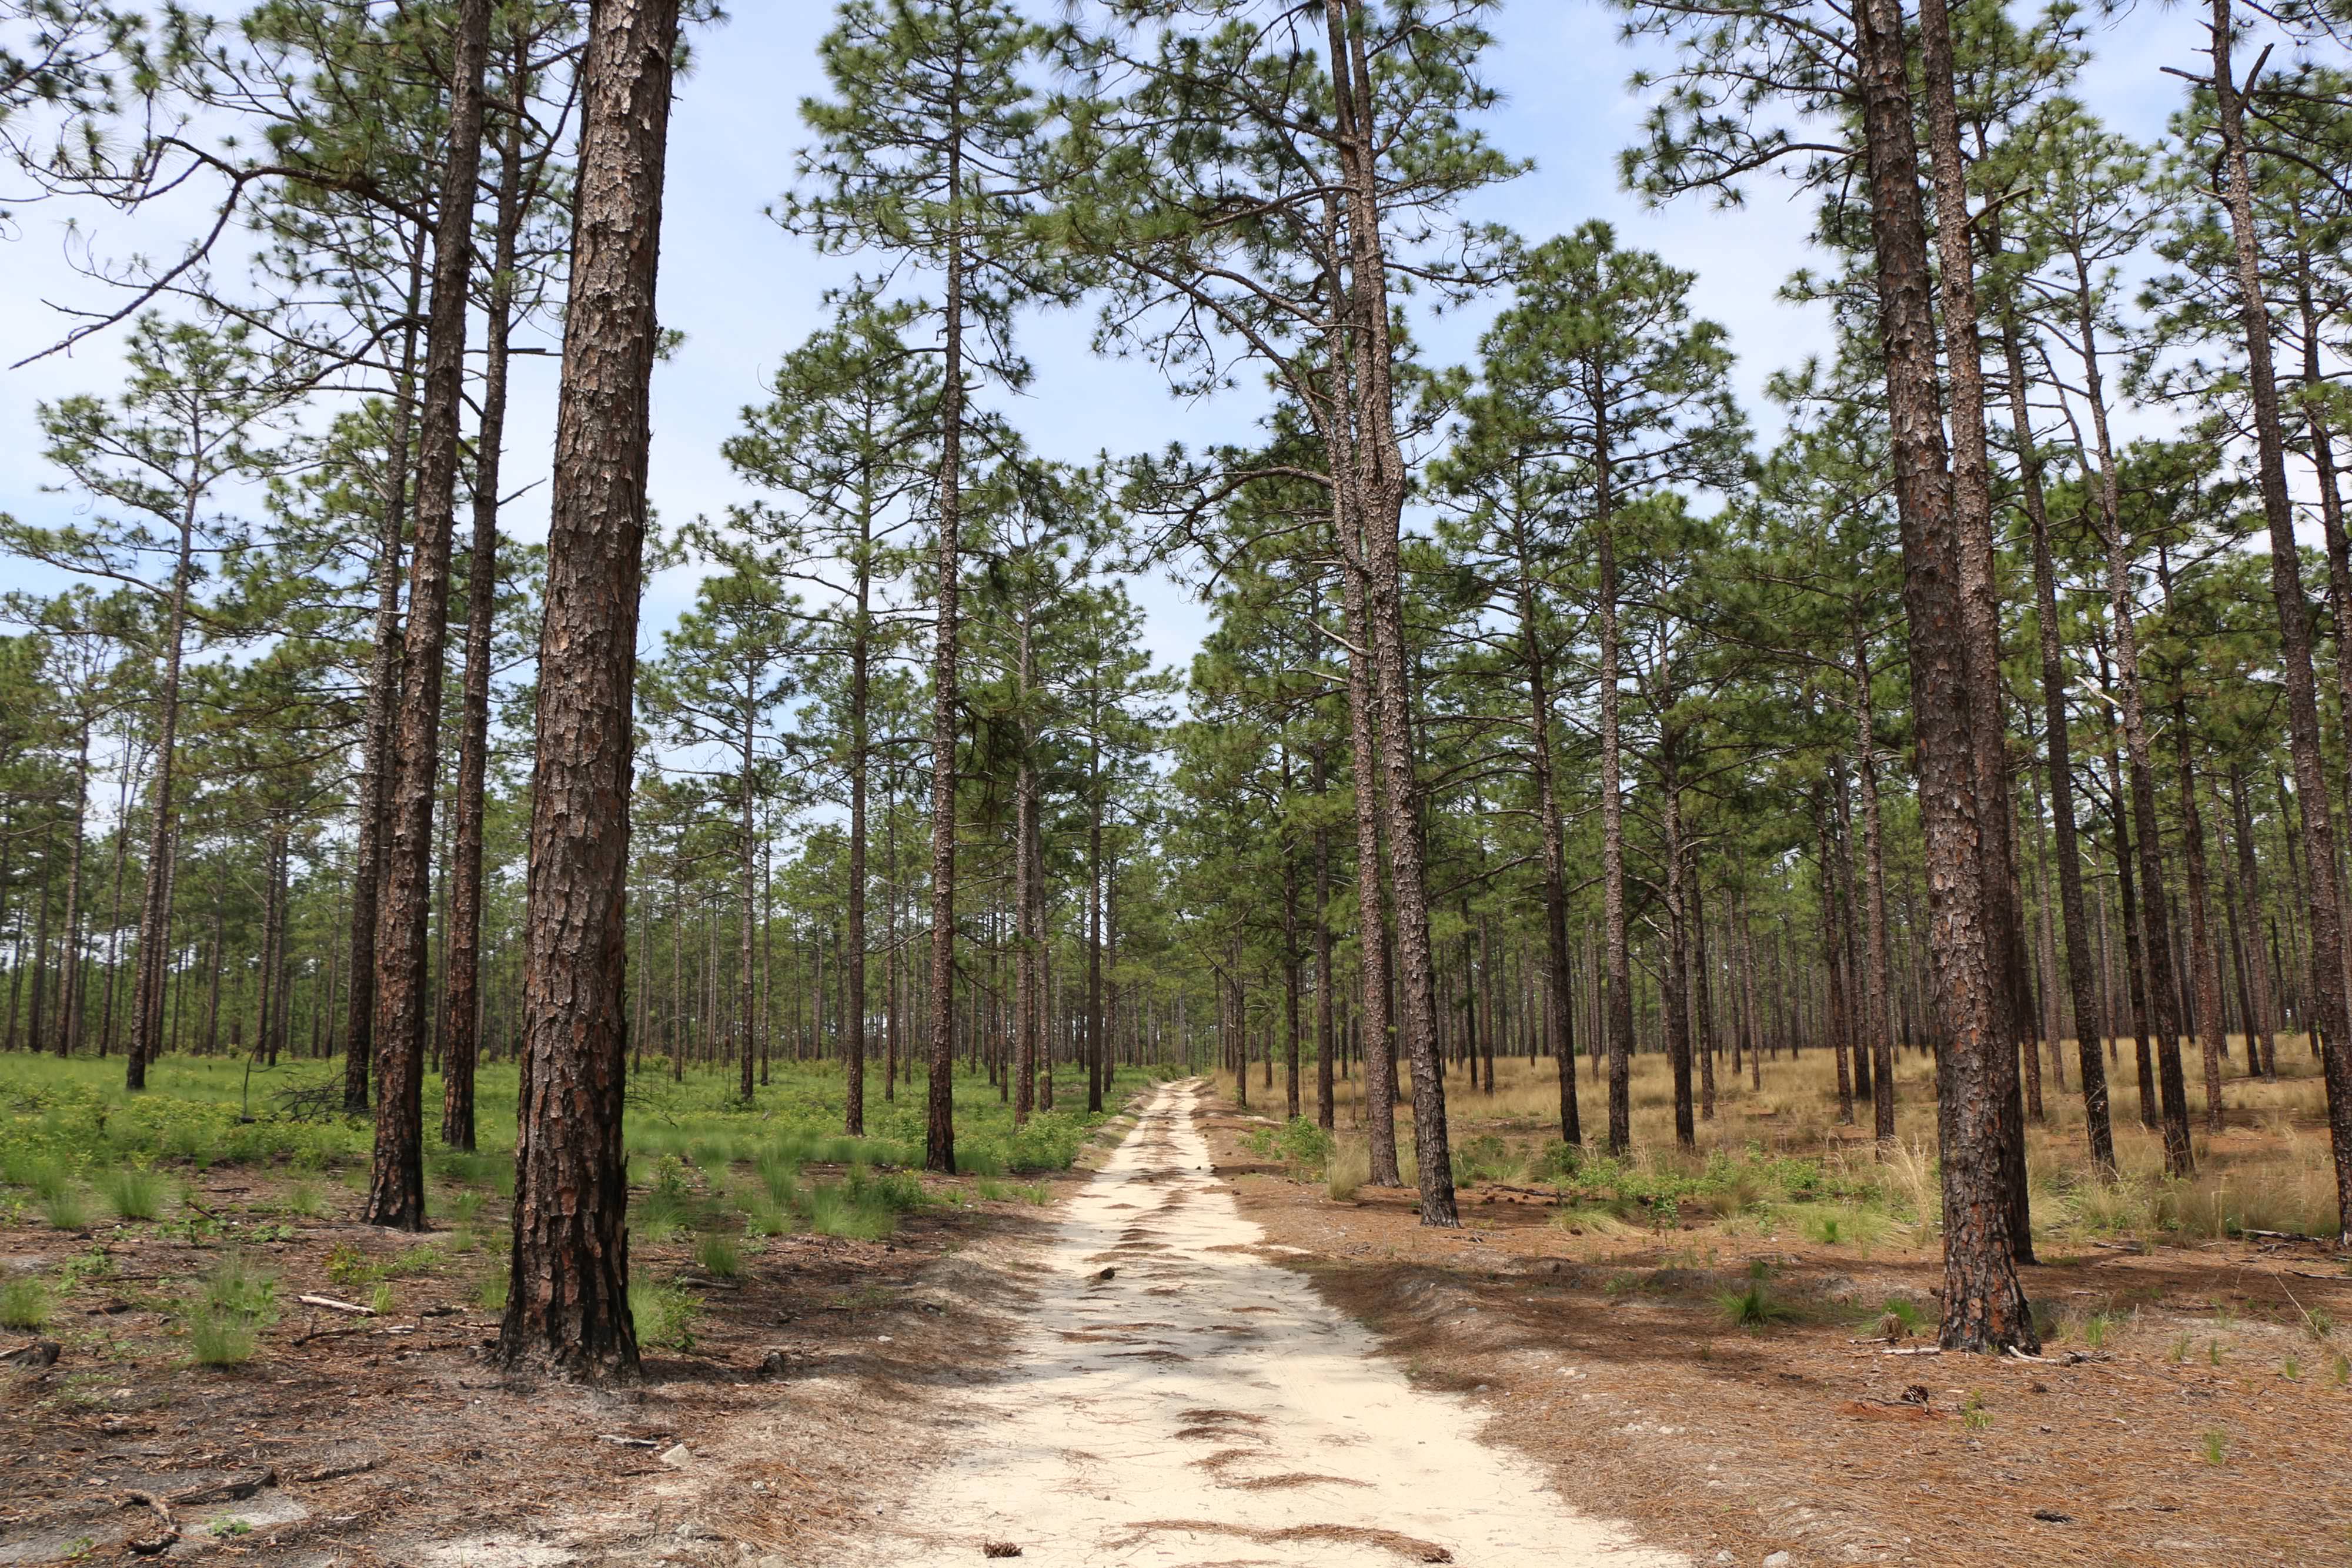 The sandy road that winds through Calloway Forest Preserve in North Carolina.